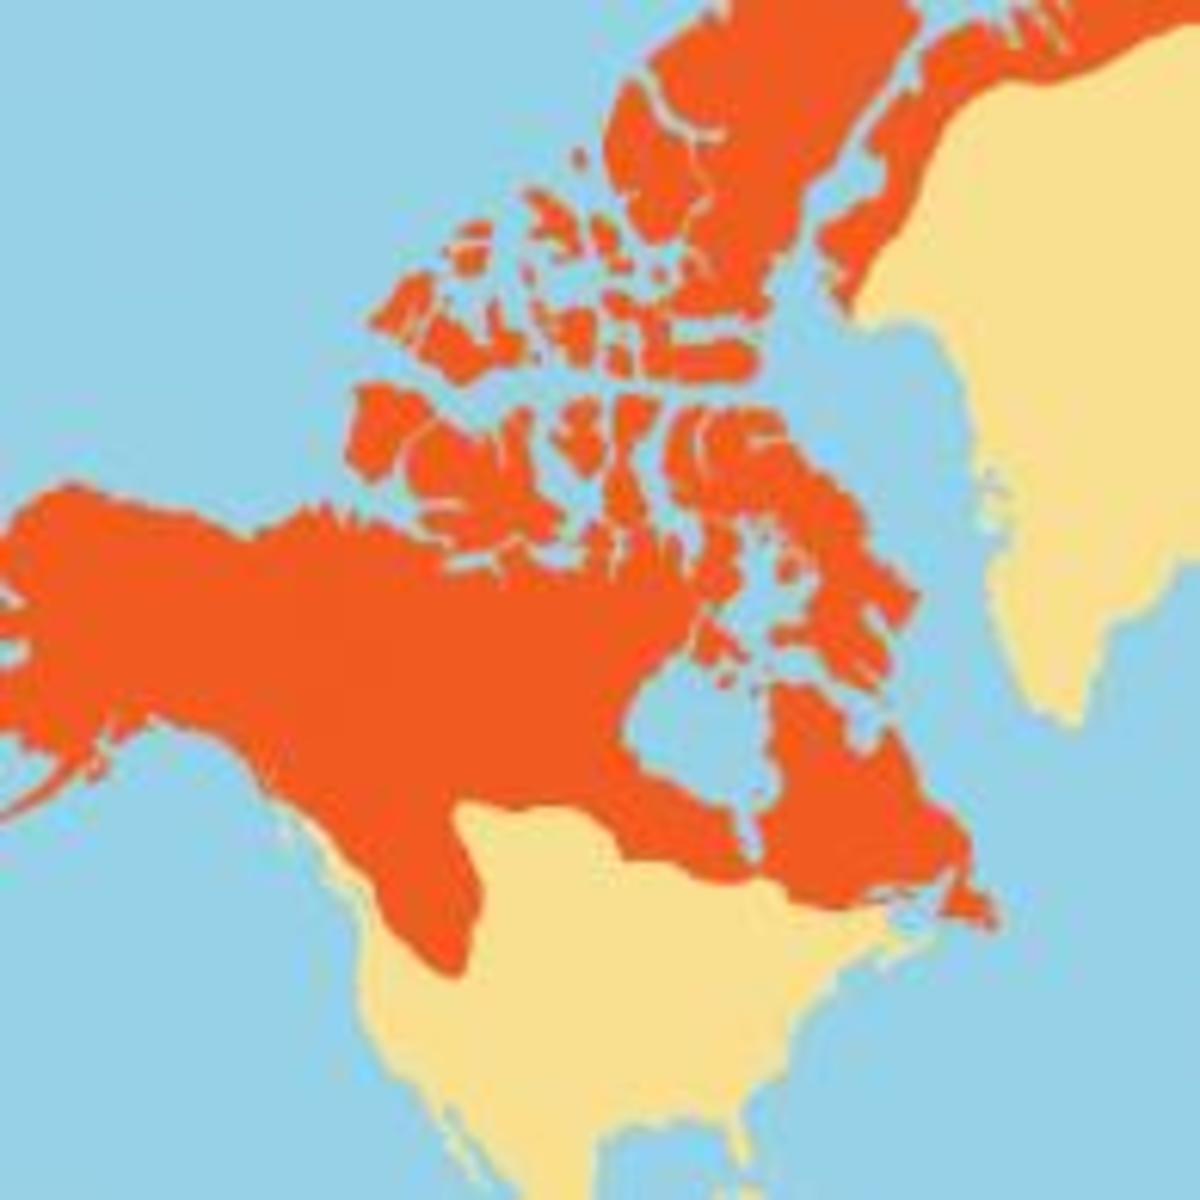 Orange or red represents native gray wolf country in North America.